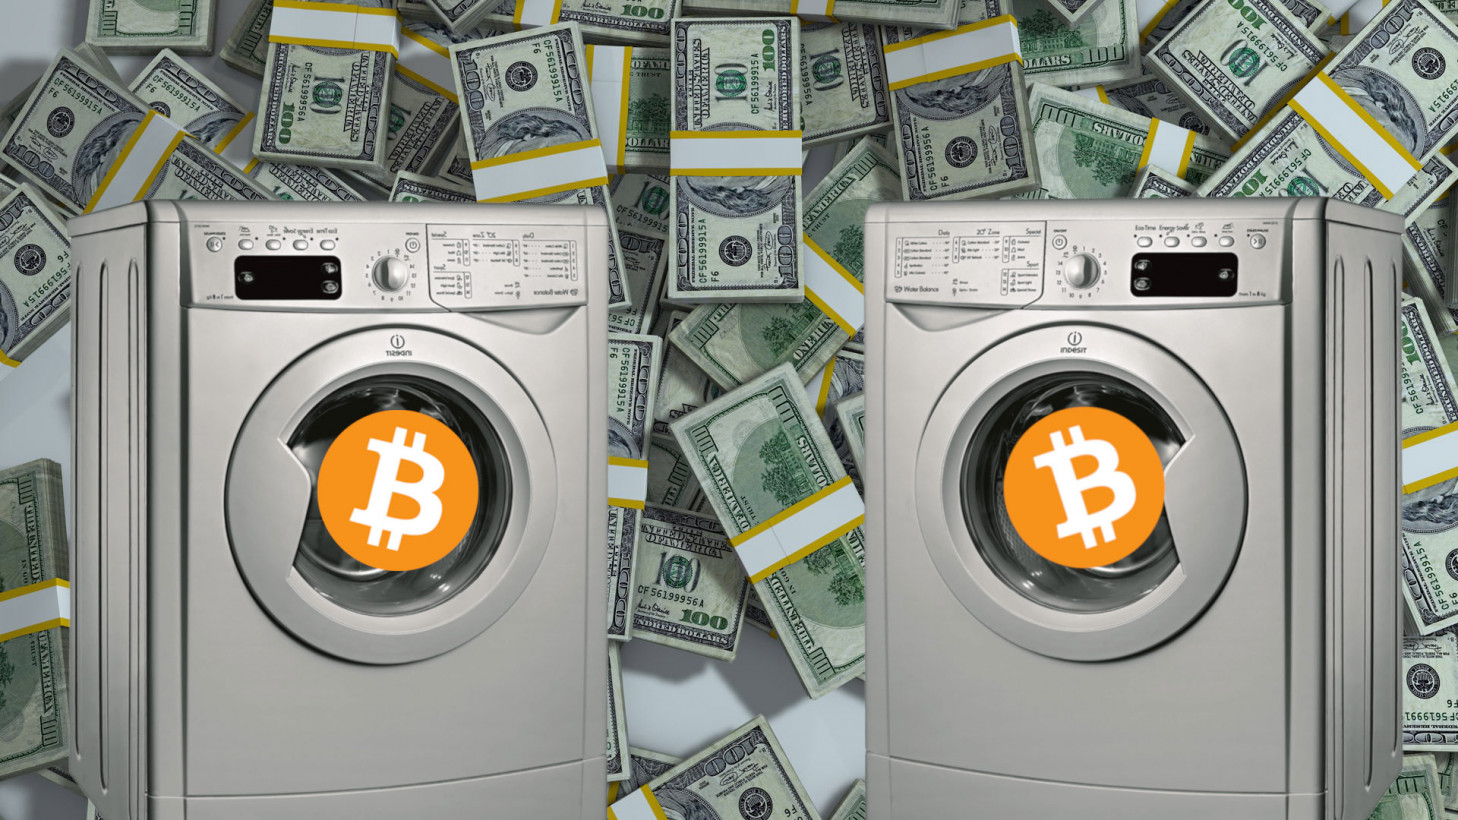 Money laundering and bitcoin how to check ethereum balance